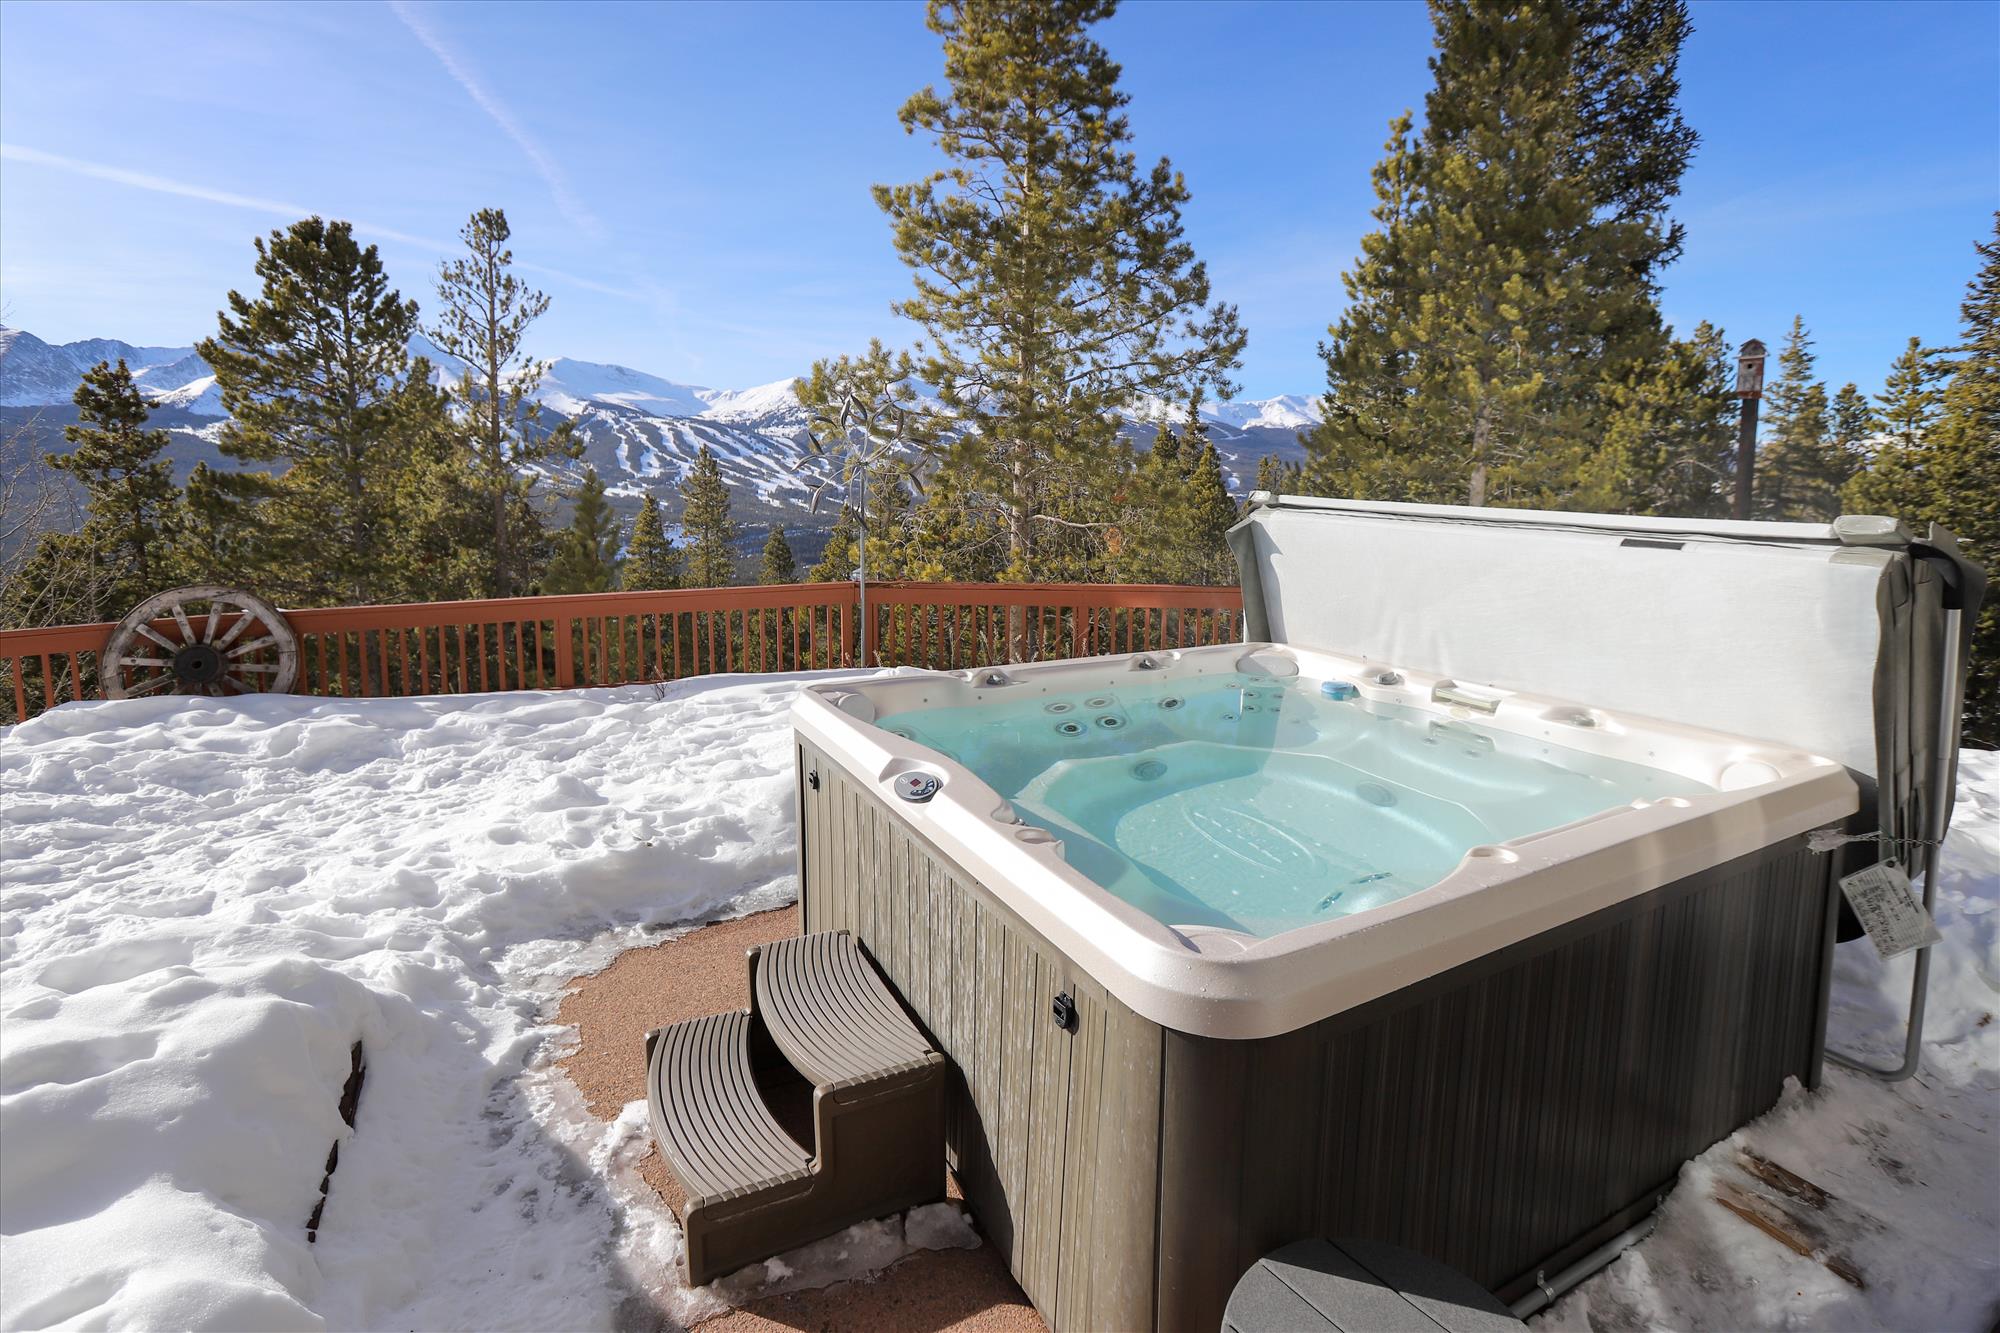 Hot tub area with beautiful panoramic views of the mountains.